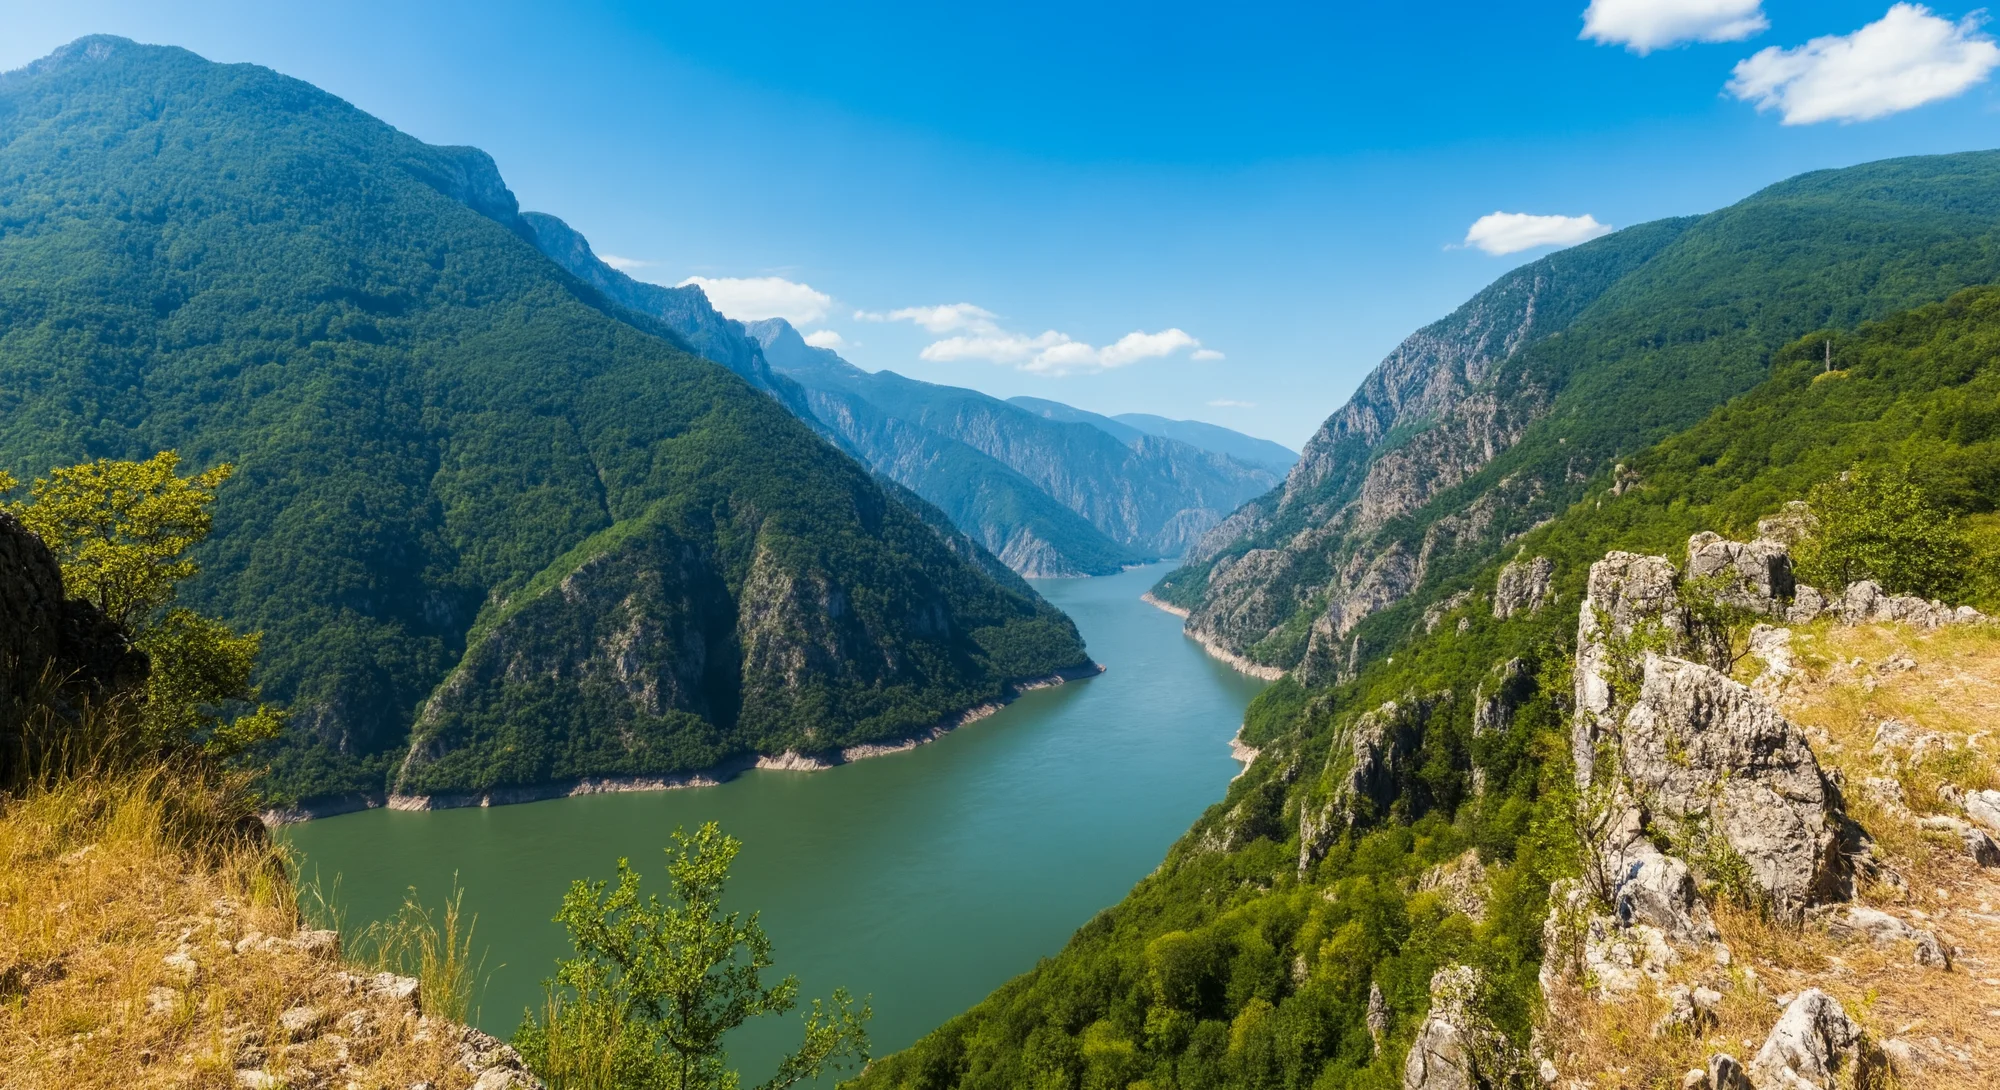 A wide river winds through a deep gorge carved into a lush, green mountain range under a clear blue sky. The river is calm and reflects the surrounding landscape. The sun shines brightly, casting shadows on the slopes and highlighting the textures of the rocks.